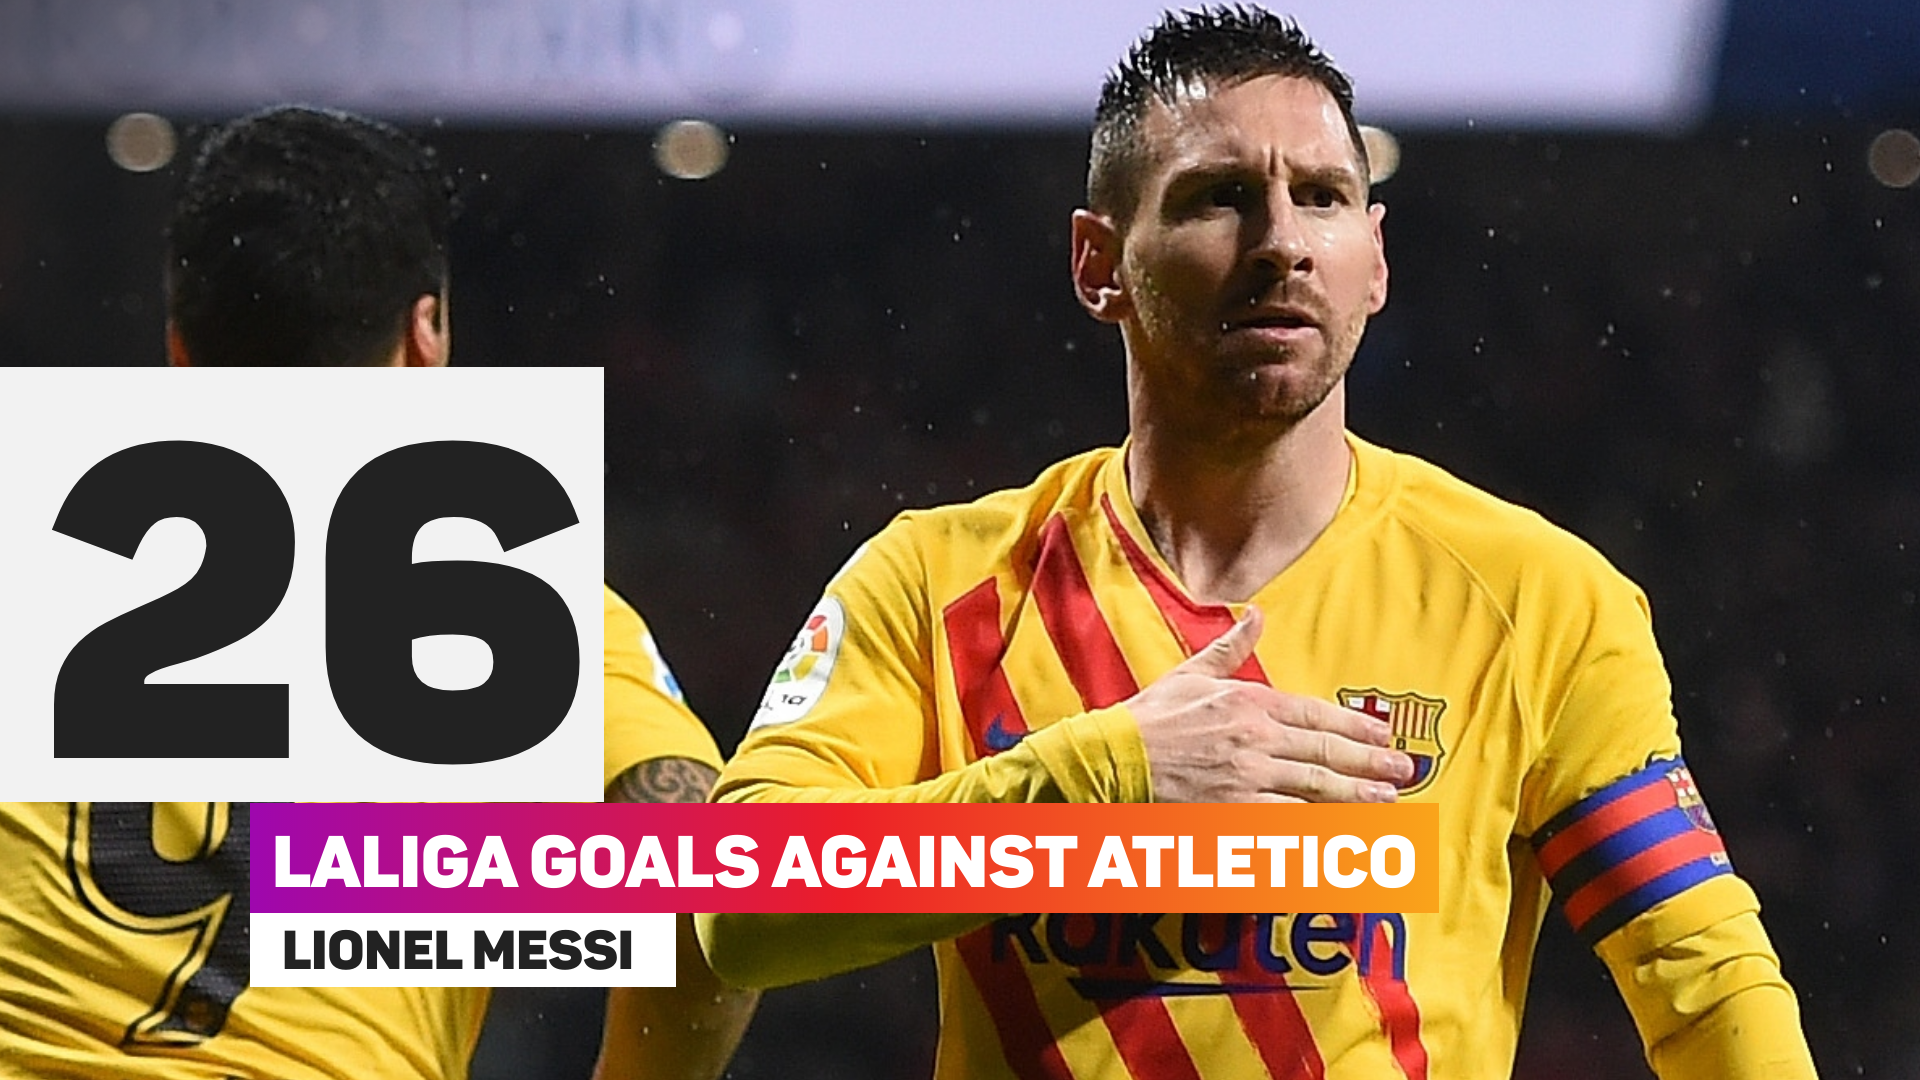 Lionel Messi had a great record against Atletico Madrid